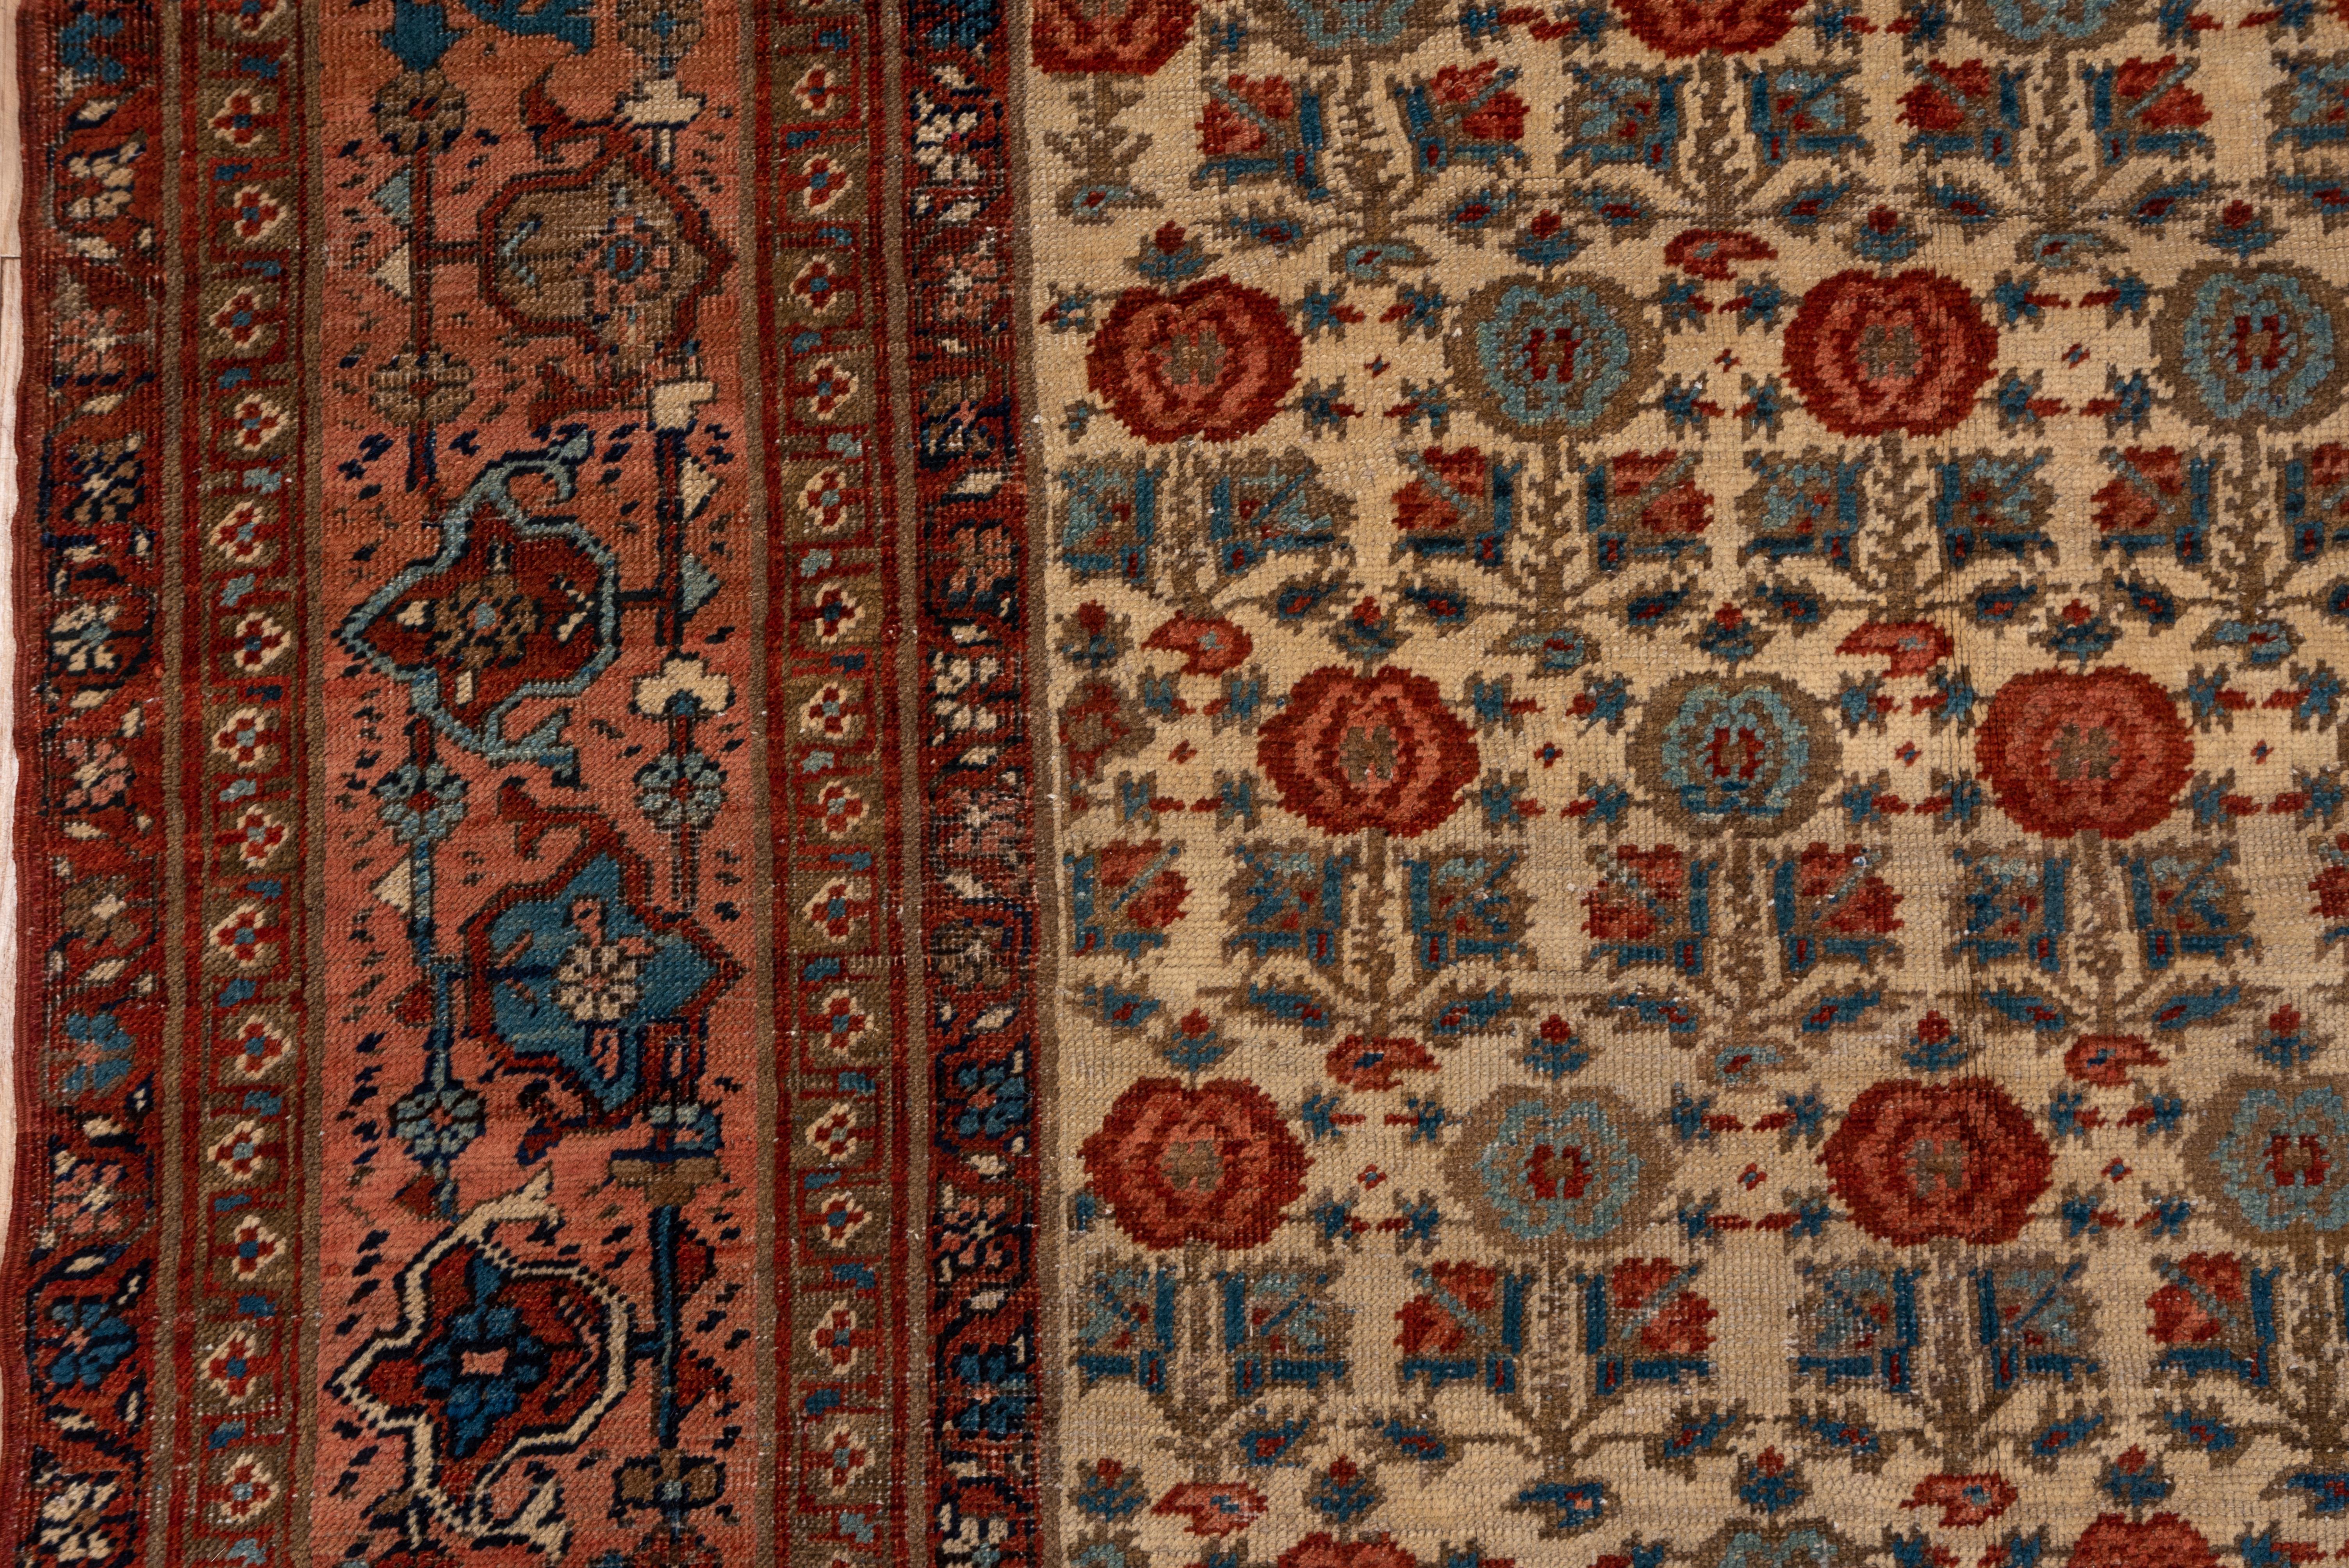 The old ivory field displays offset rows of flowers, all closely adopted from 18th century Persian silk textiles, and a shrimp main border of wonky reversing escutcheon palmettes. Red, teal and green details.